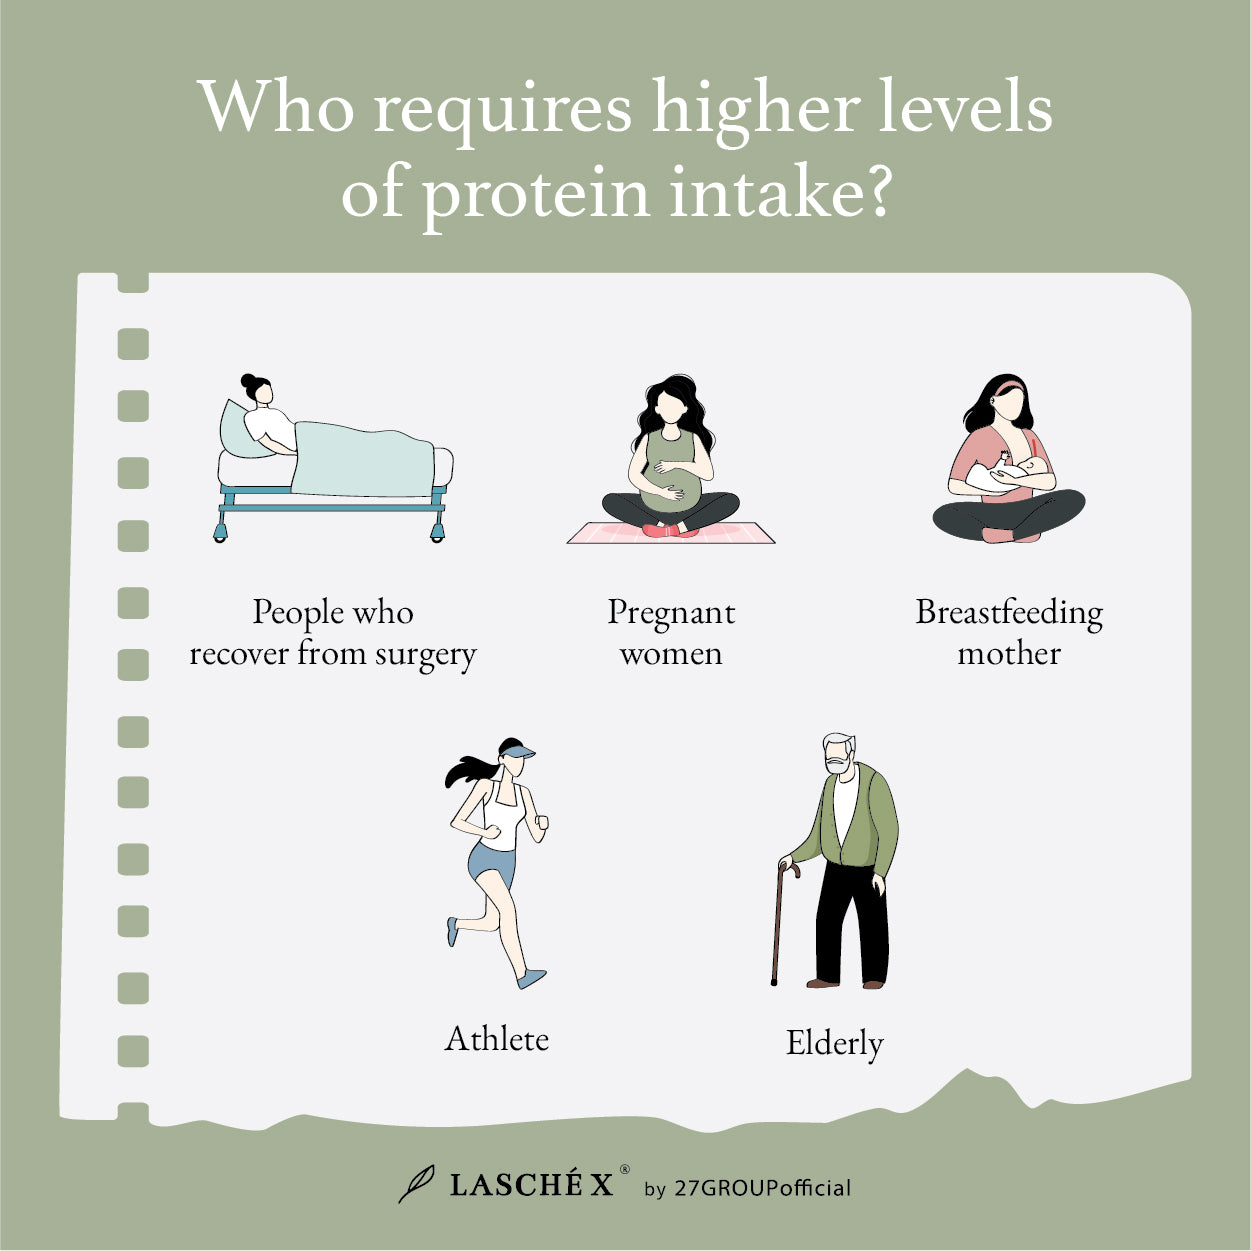 people who need higher levels of protein intake